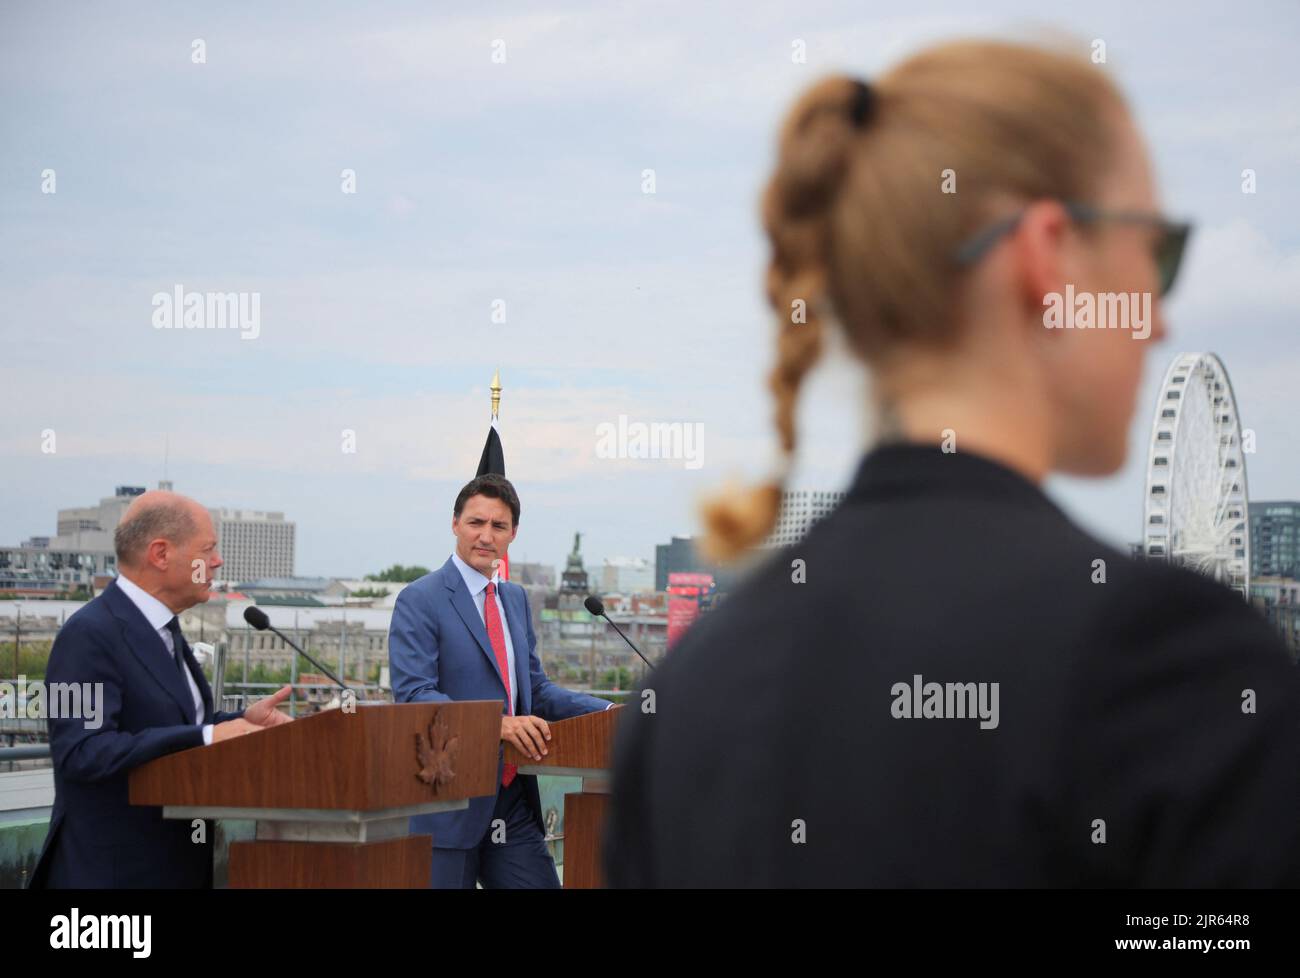 Germany's Chancellor Olaf Scholz and Canada's Prime Minister Justin Trudeau speak to the media outside the Montreal Science Centre, in Montreal, Quebec, Canada August 22, 2022. REUTERS/Christinne Muschi Stock Photo